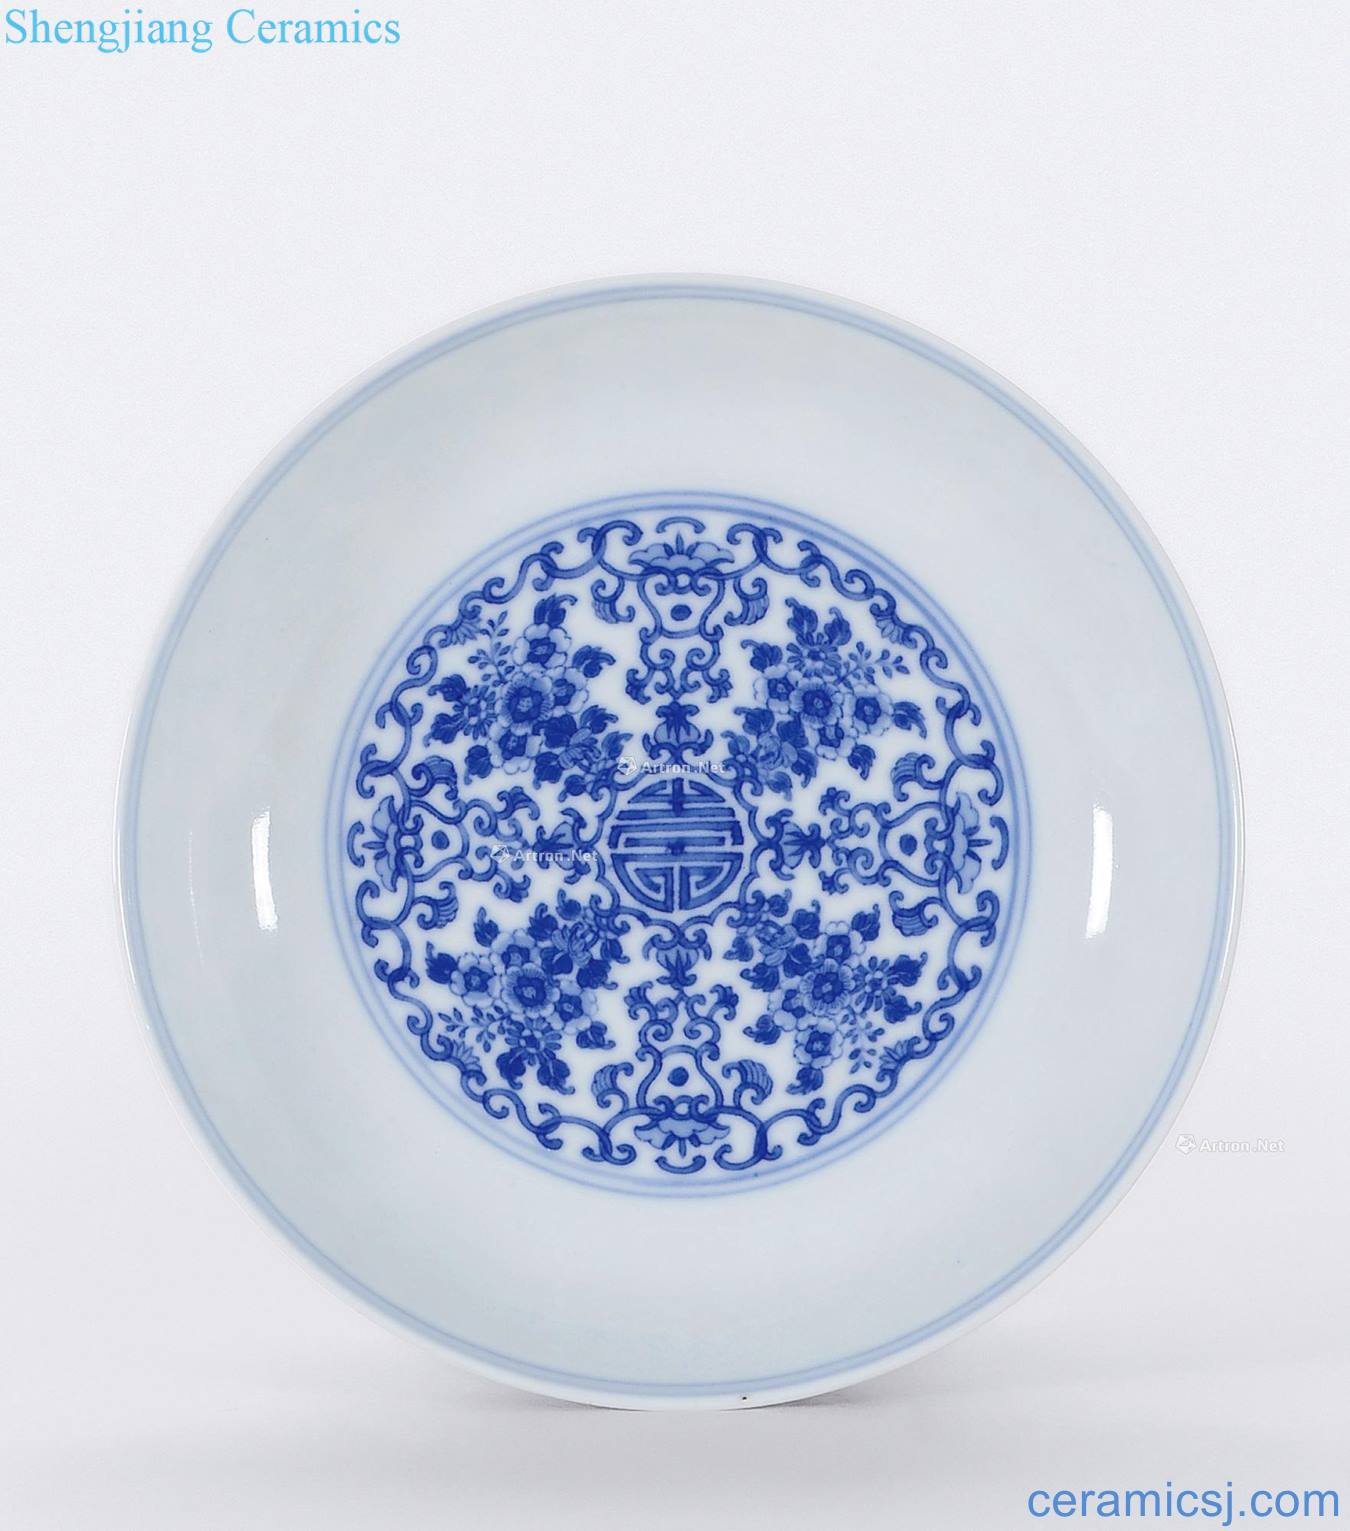 Blue and white life of qing yongzheng word group pattern plate